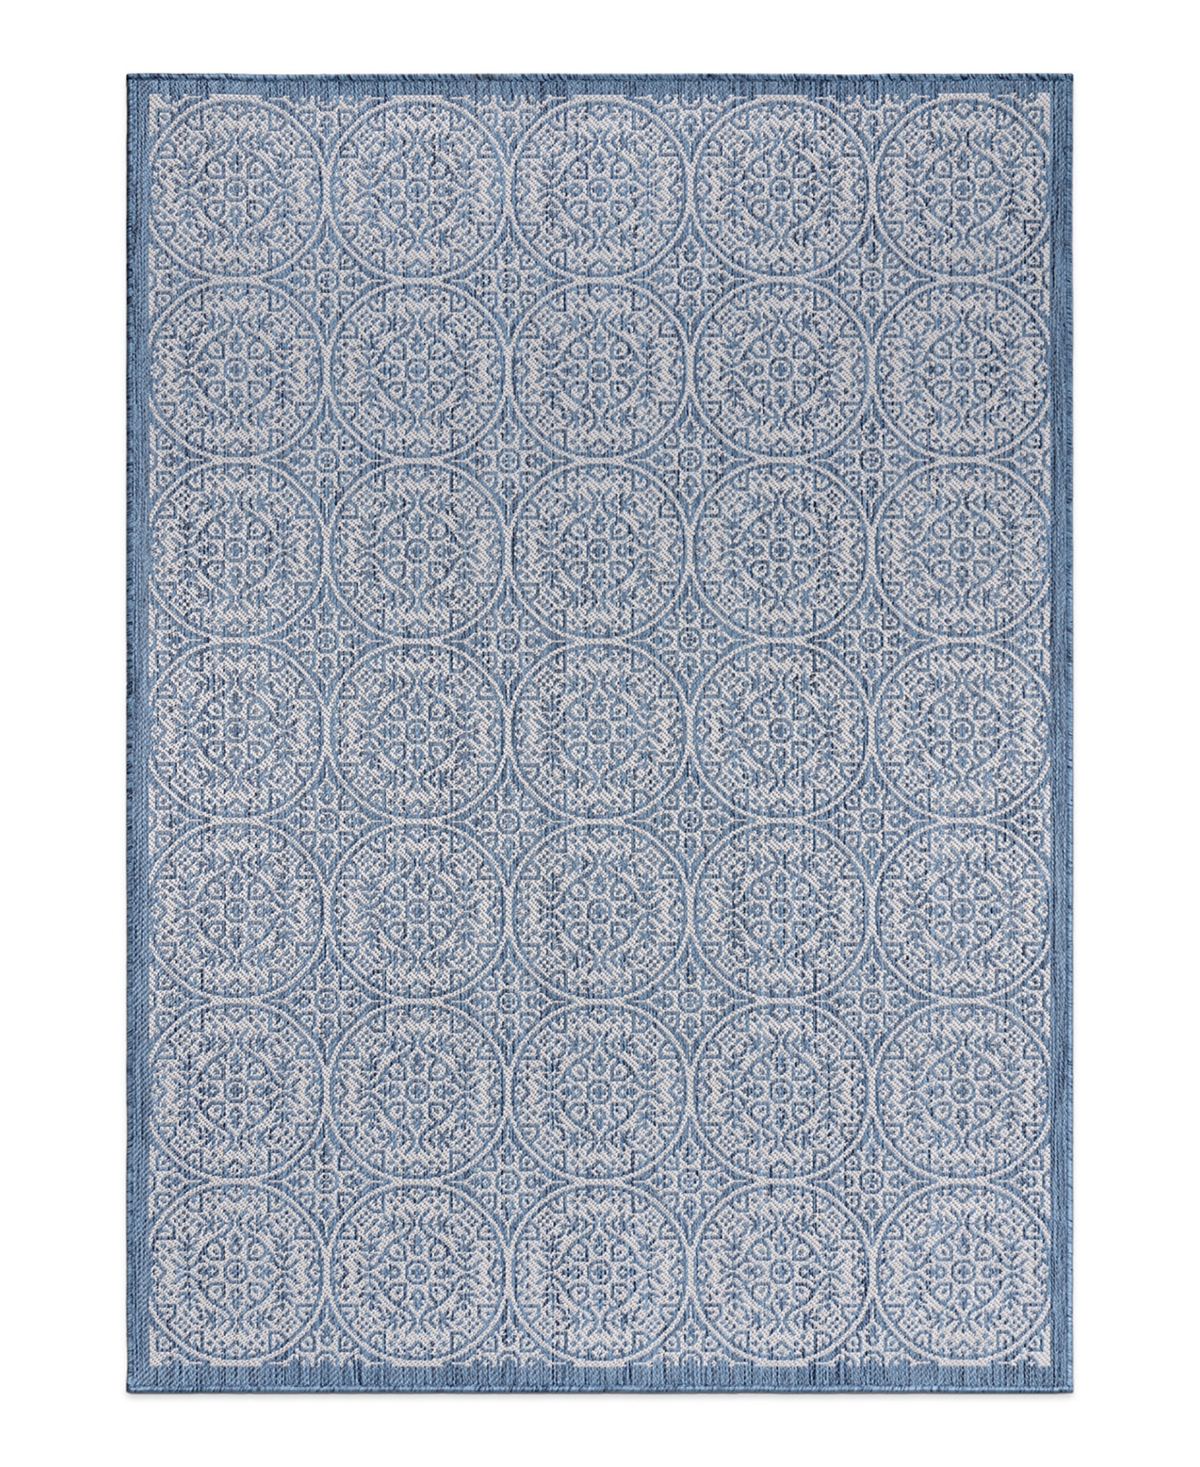 Main Street Rugs Bays Outdoor 121 7'10" X 10' Area Rug In Blue